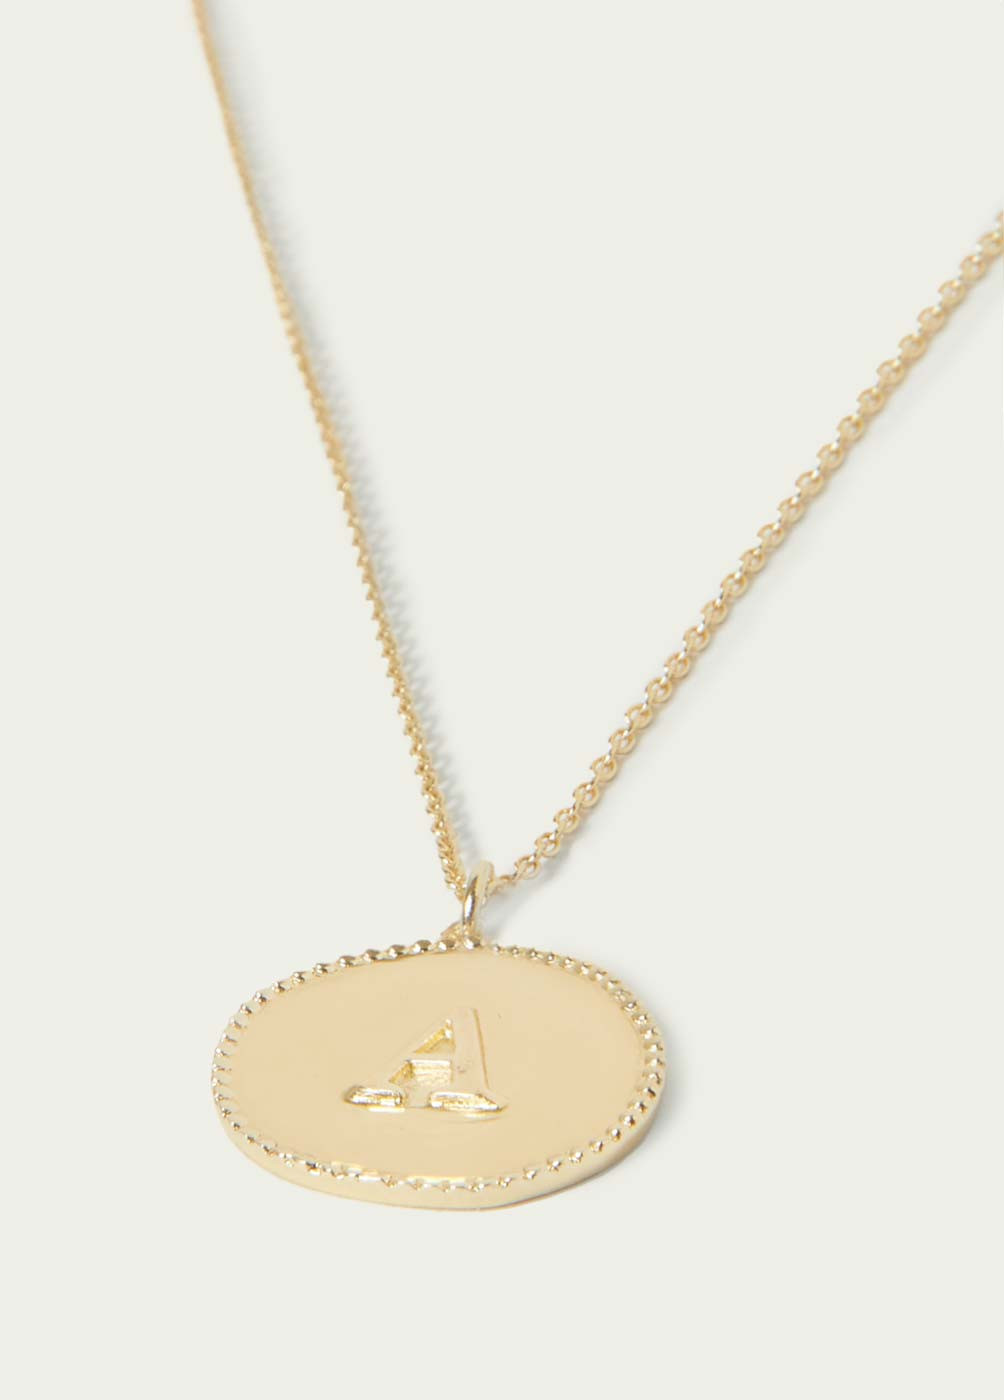 KETTING MEDAILLE INITIAAL A